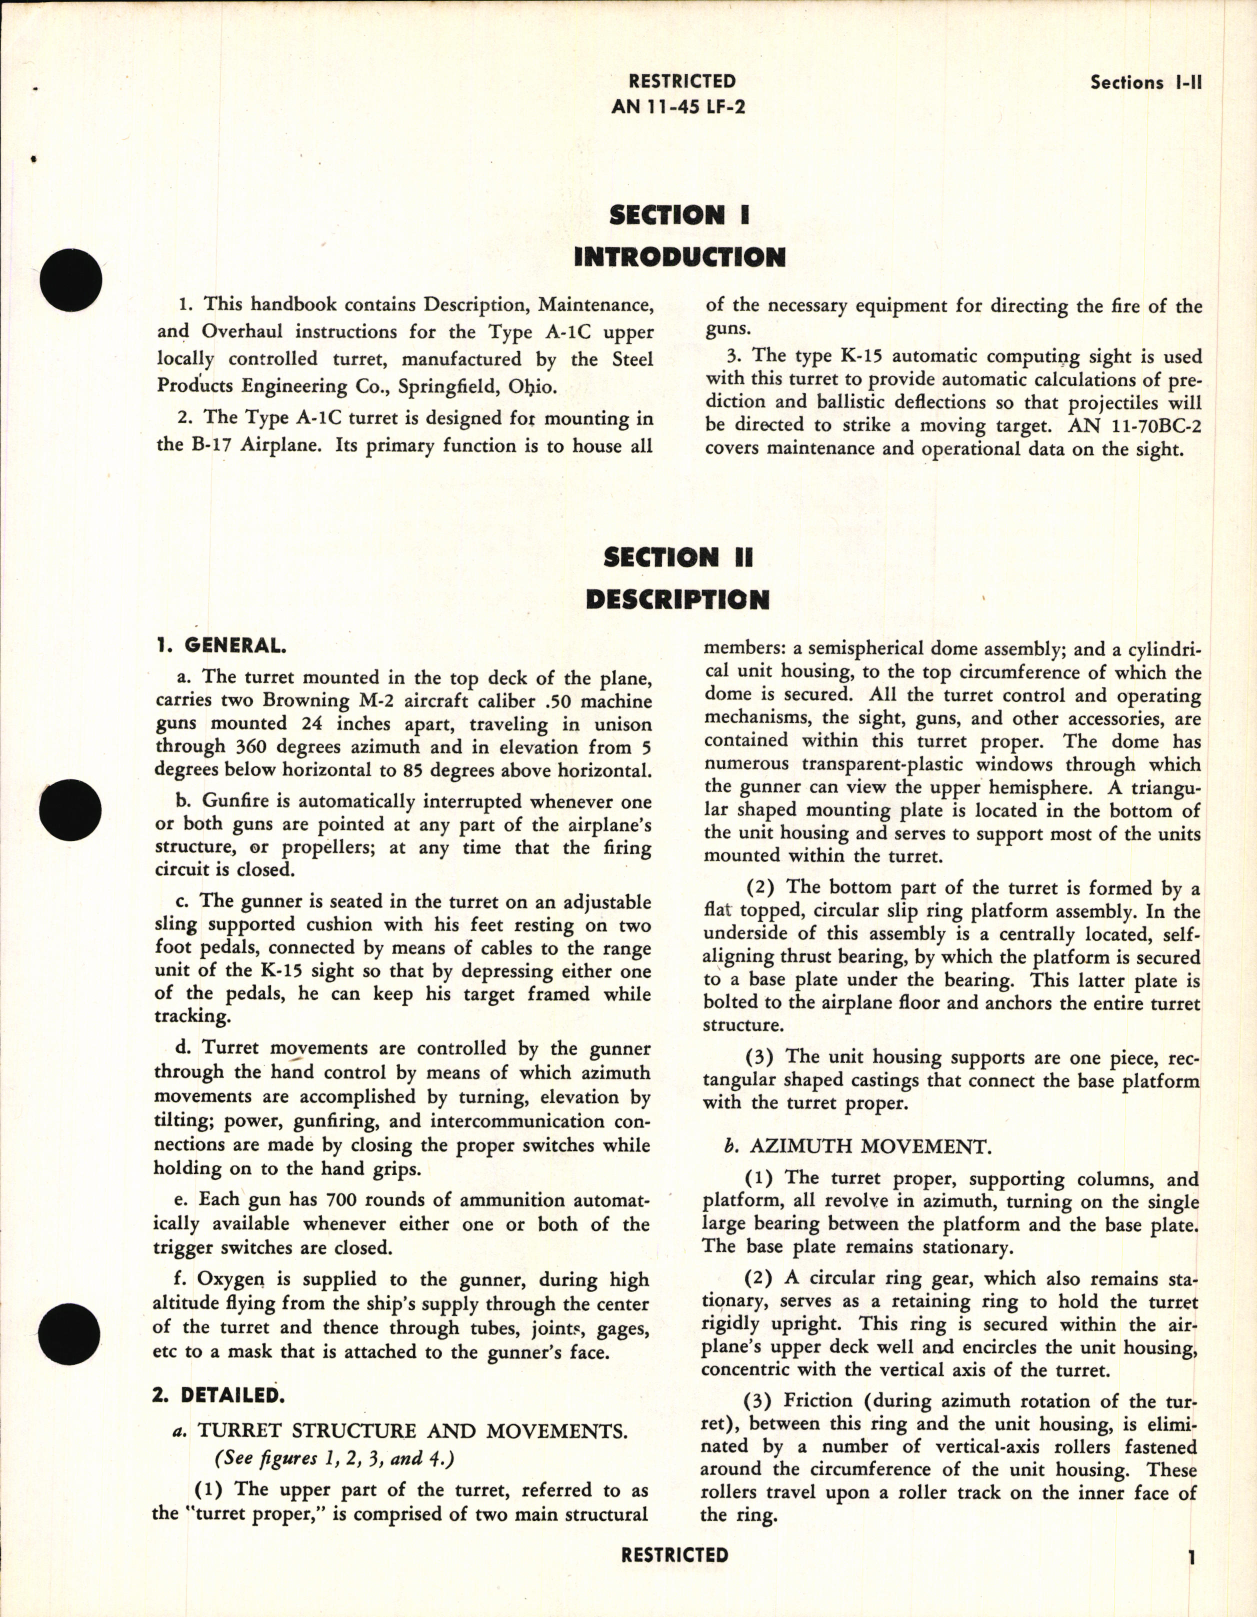 Sample page 5 from AirCorps Library document: Operation, Service, & Overhaul Instructions for Upper Deck Turret Type A-1C